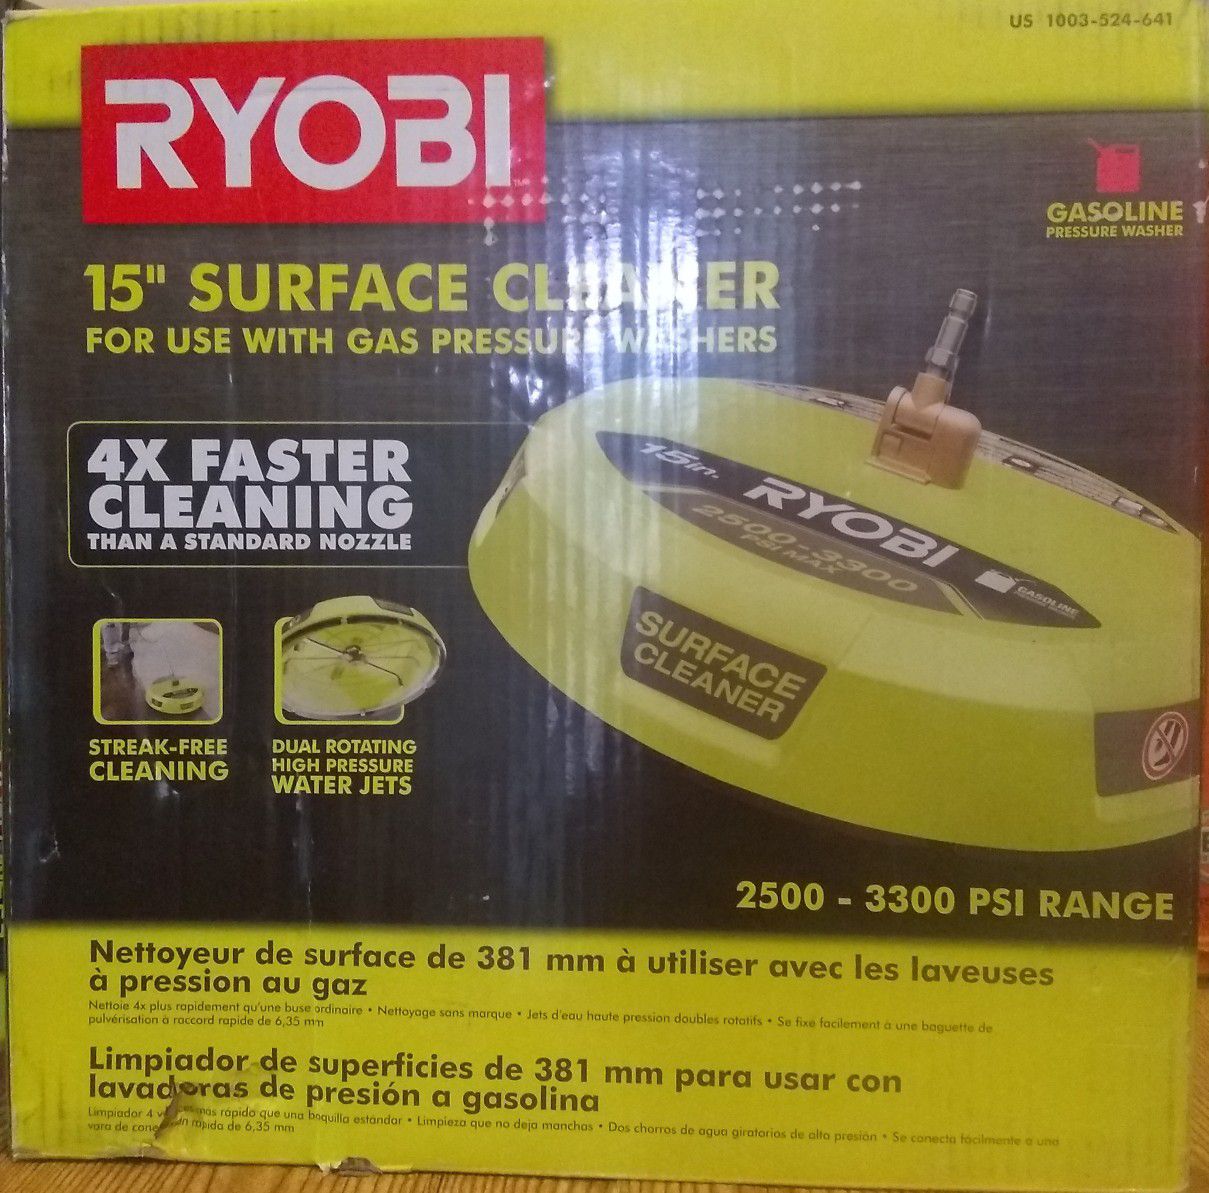 RYOBI 15 in. 3300 PSI Surface Cleaner for Gas Pressure Washer